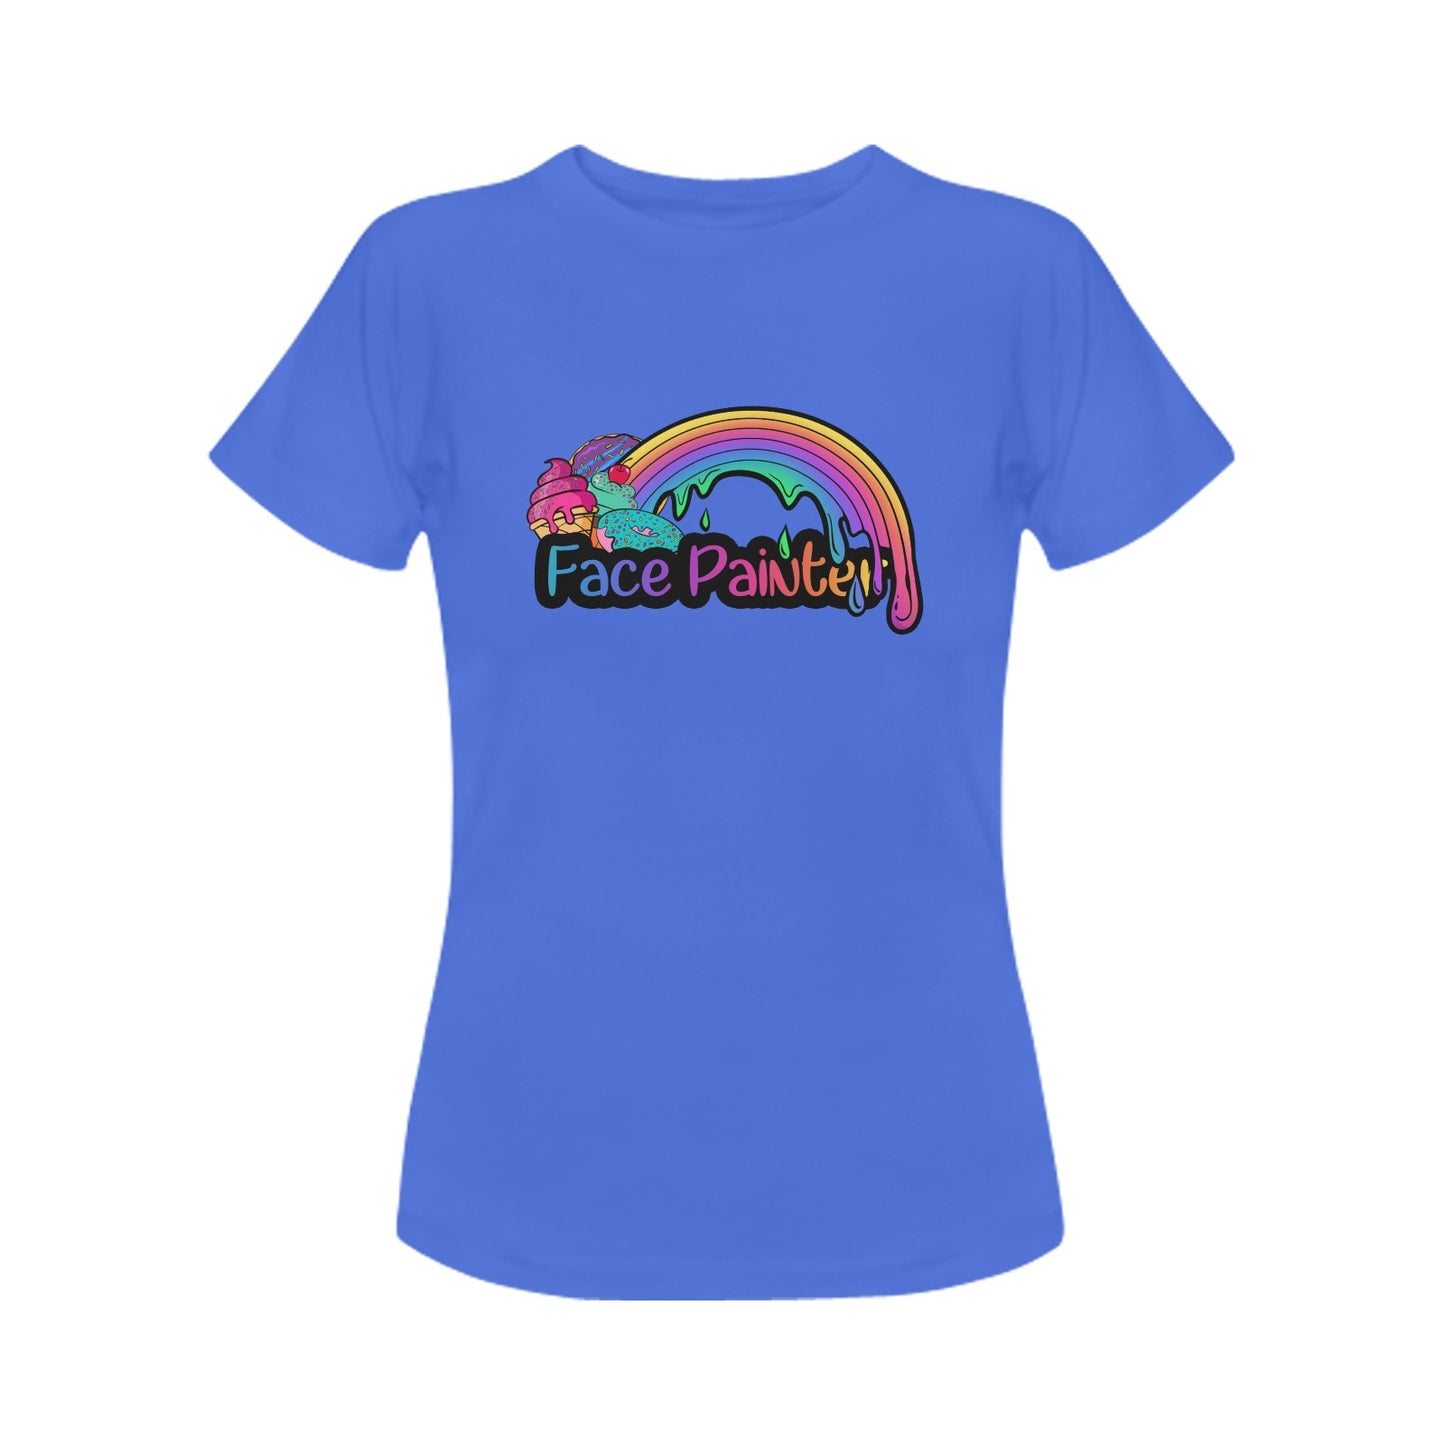 Blue Face Painter t-shirt with rainbow and desserts design